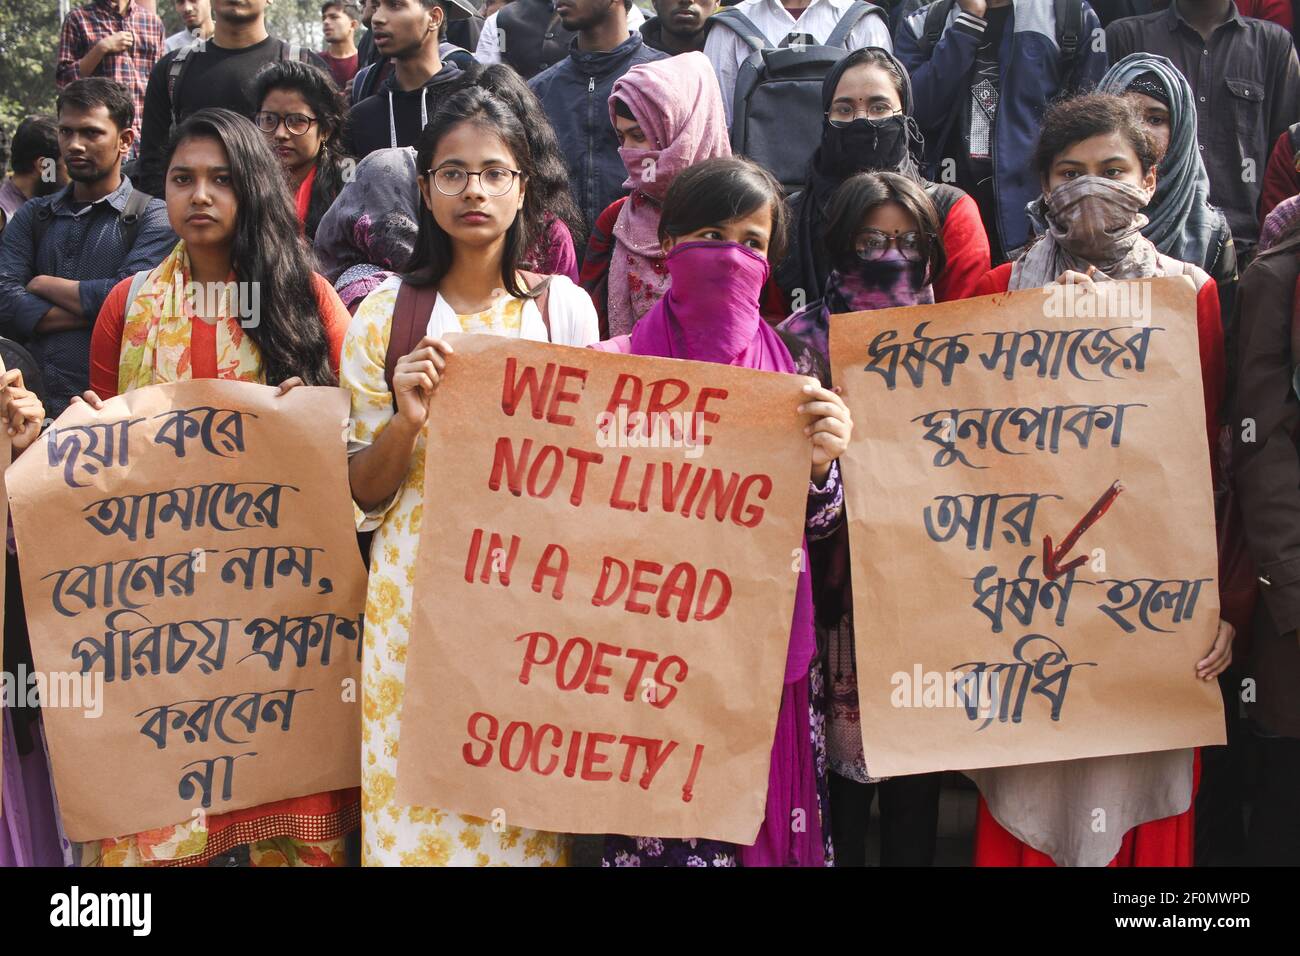 Dhaka University students hold a rally to demand punishment for the people involved in the rape case of a female student of Dhaka University in Dhaka, Bangladesh. (Photo by MD Abu Sufian Jewel/Pacific Press/Sipa USA) Stock Photo